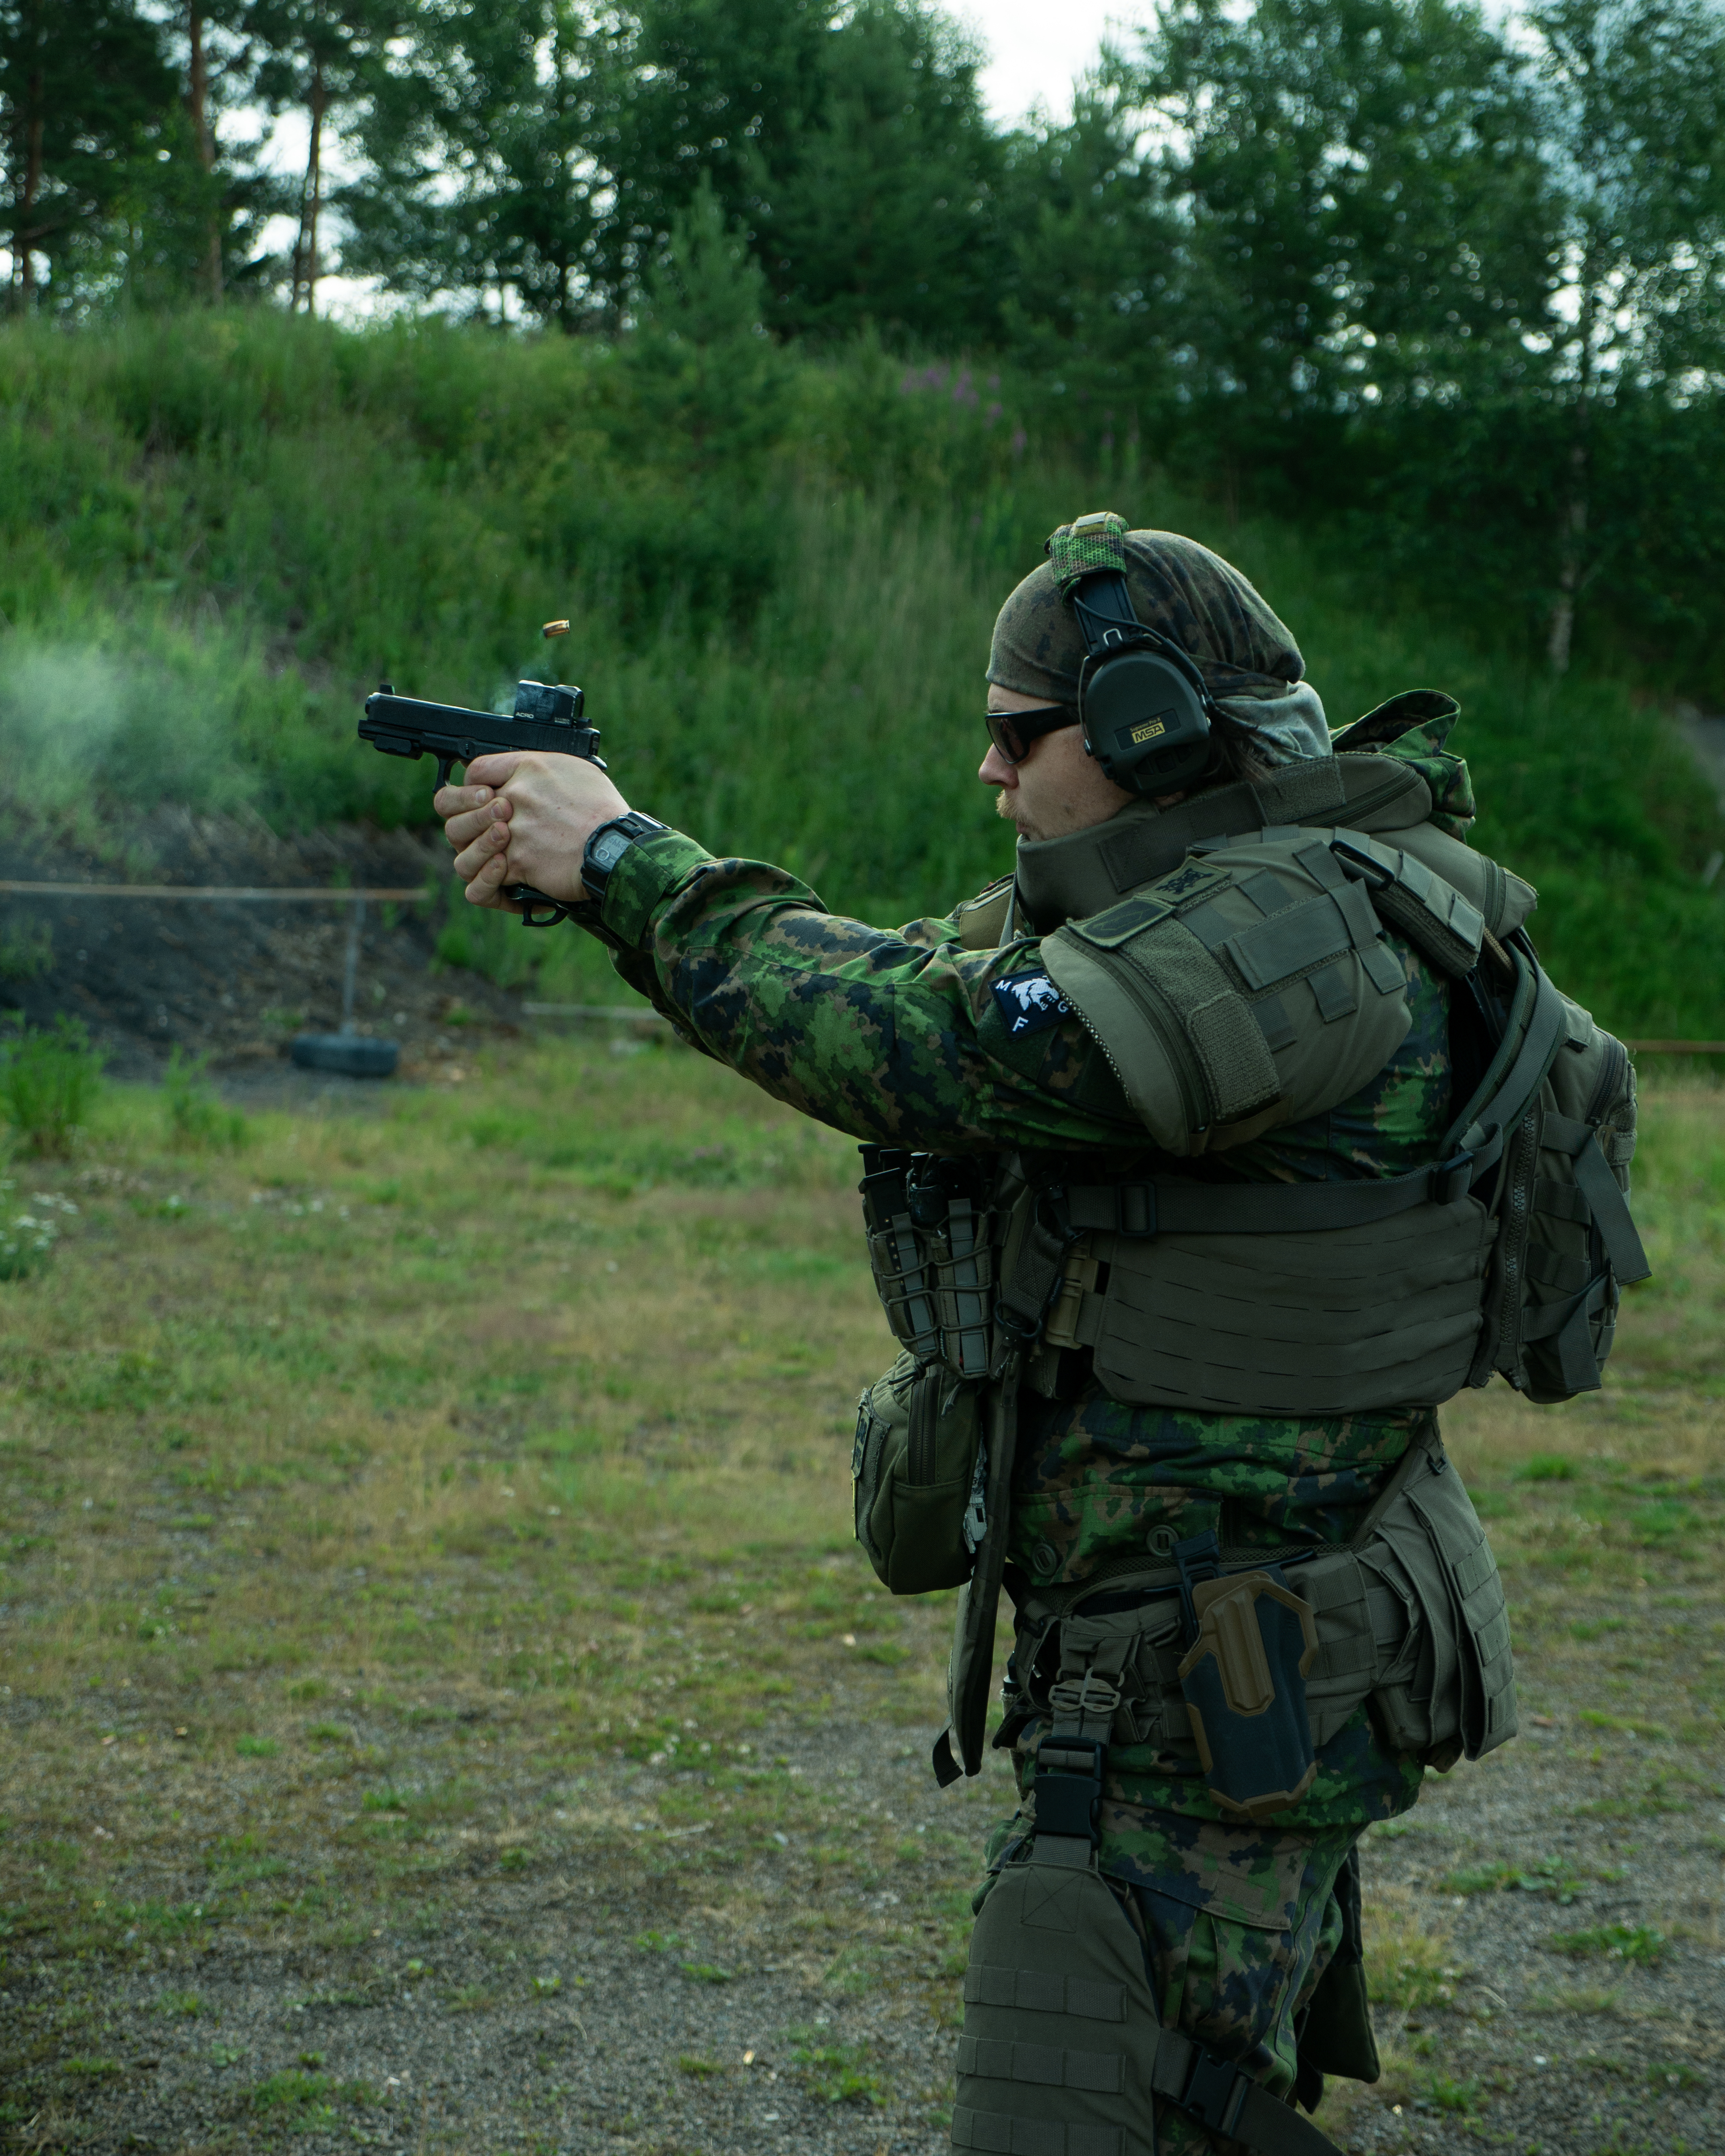 Man shooting a pistol. The pistol has a red dot on it. The man is wearing body armor and a M05 camo jacket. He is on a shooting range.